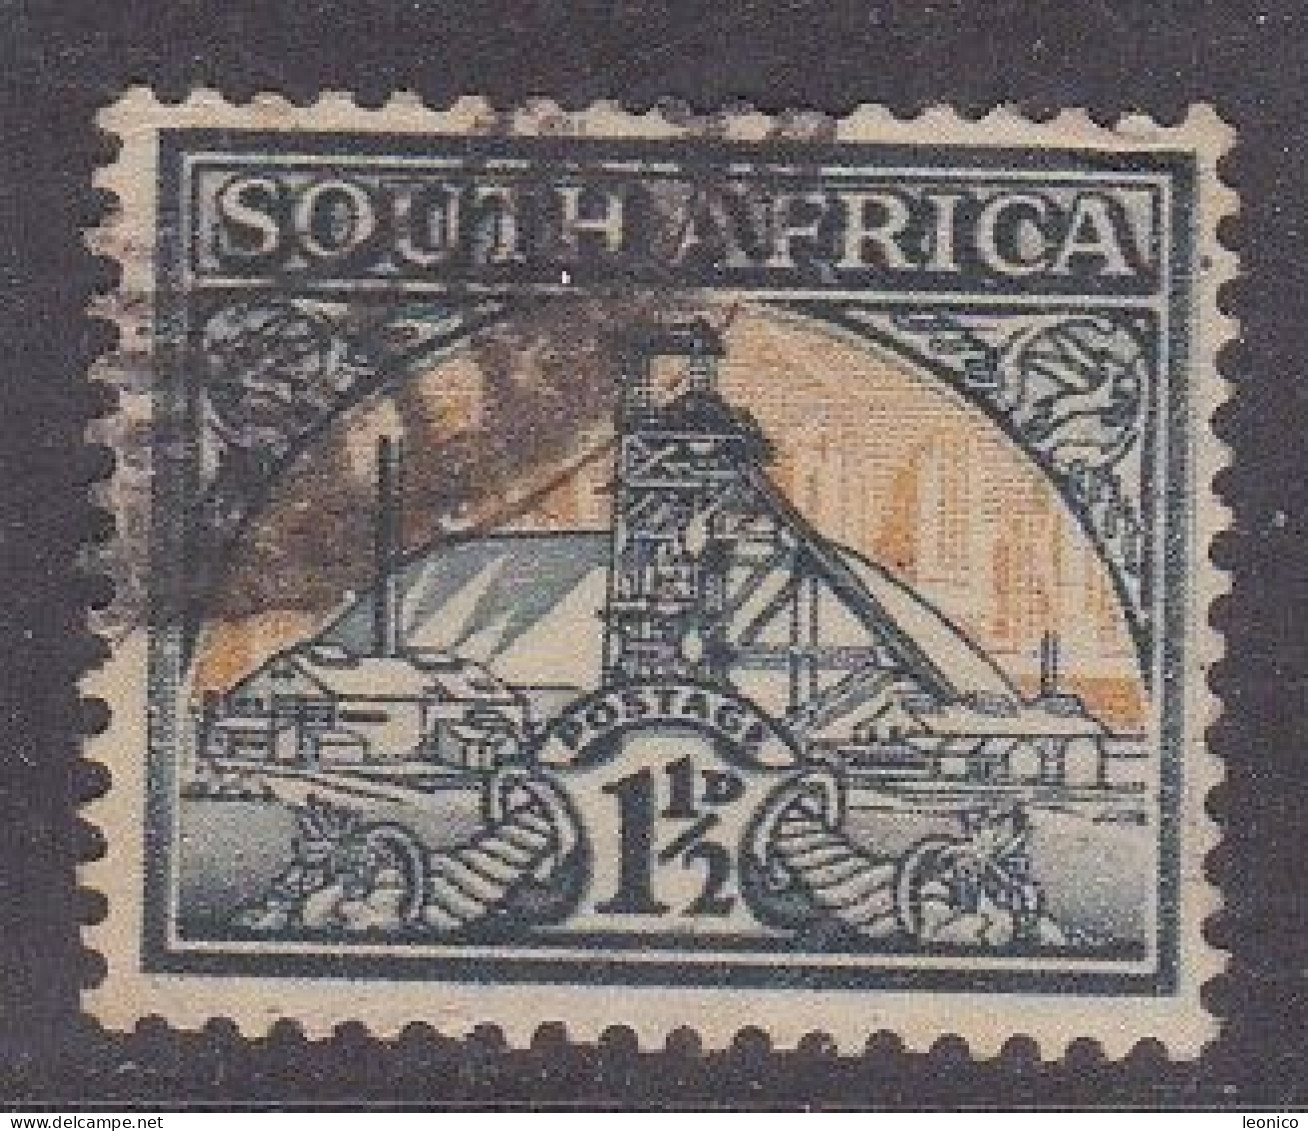 South--AFRIKA 1936 / Mic.Nr80 / Bn476 - Used Stamps